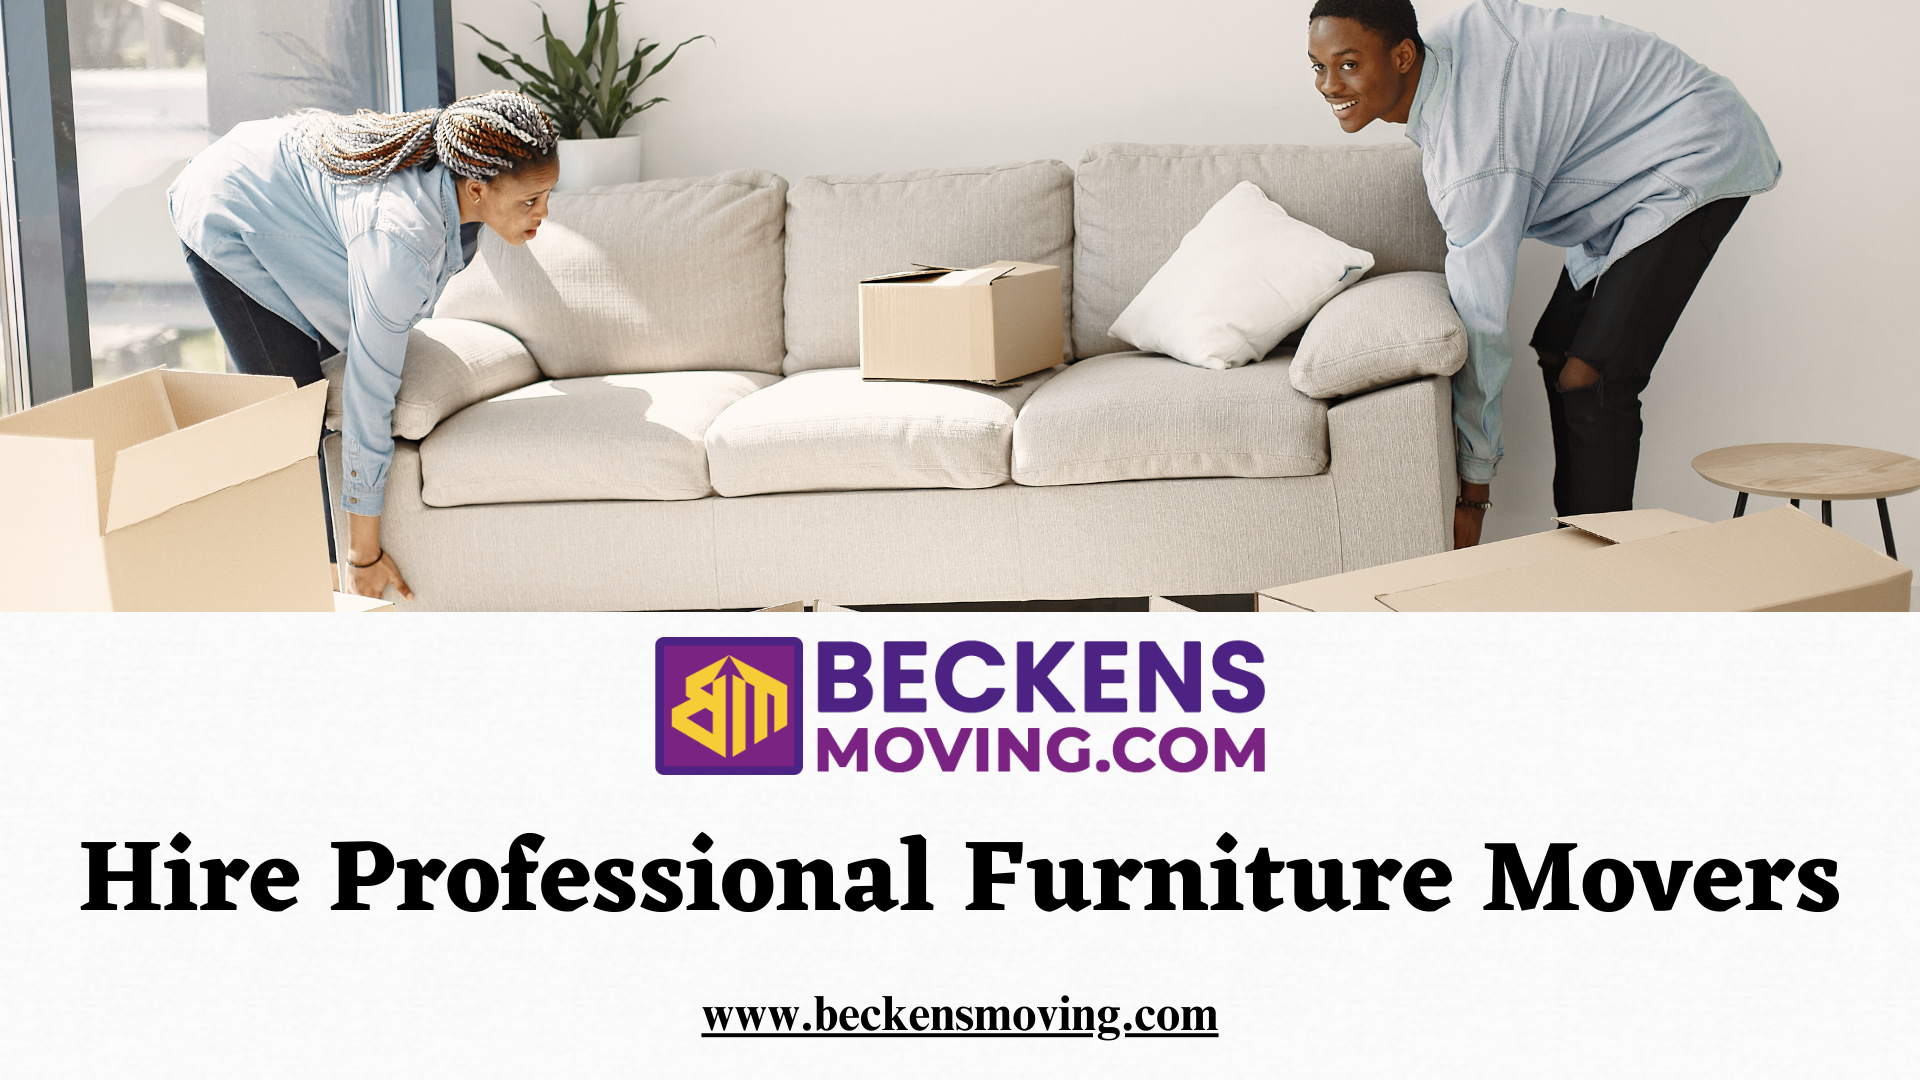 Why Should You Hire Professional Furniture Movers?